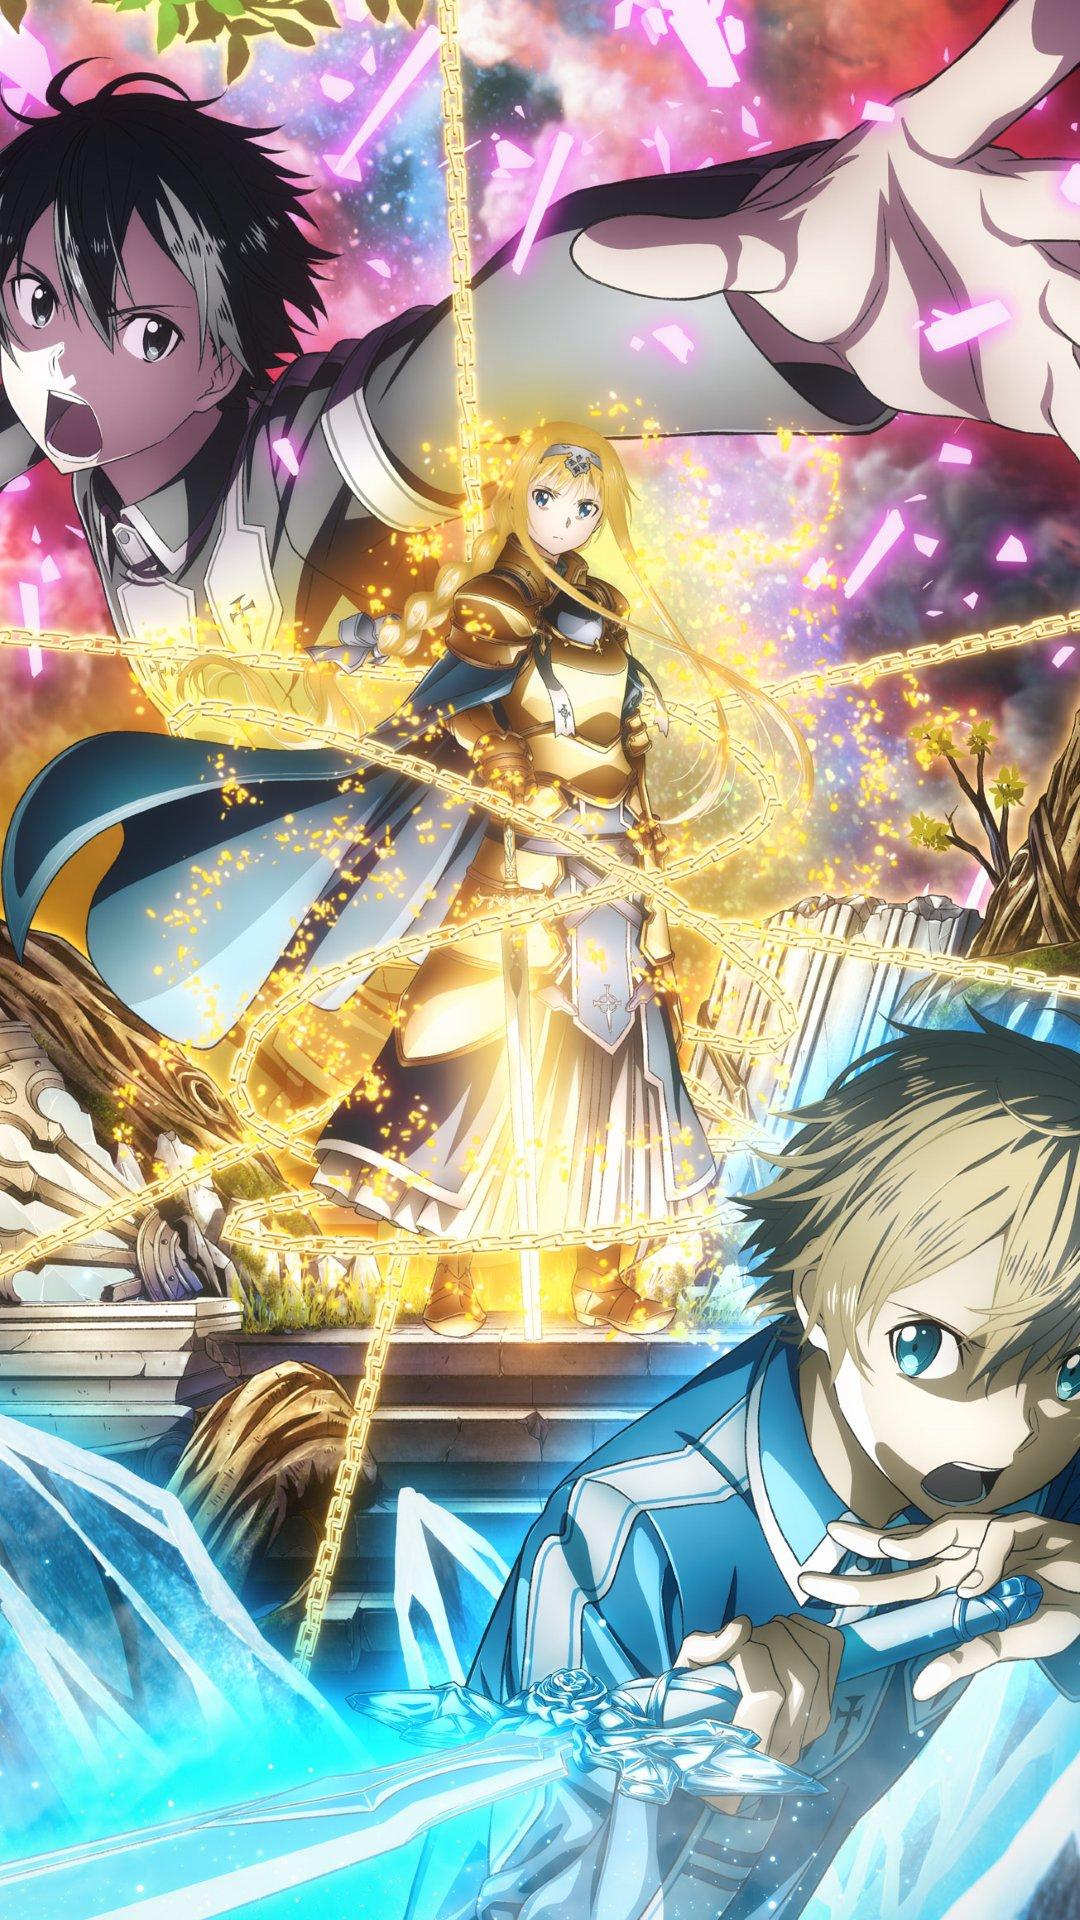 Sword Art Online: Alicization wallpaper for iPhone and android